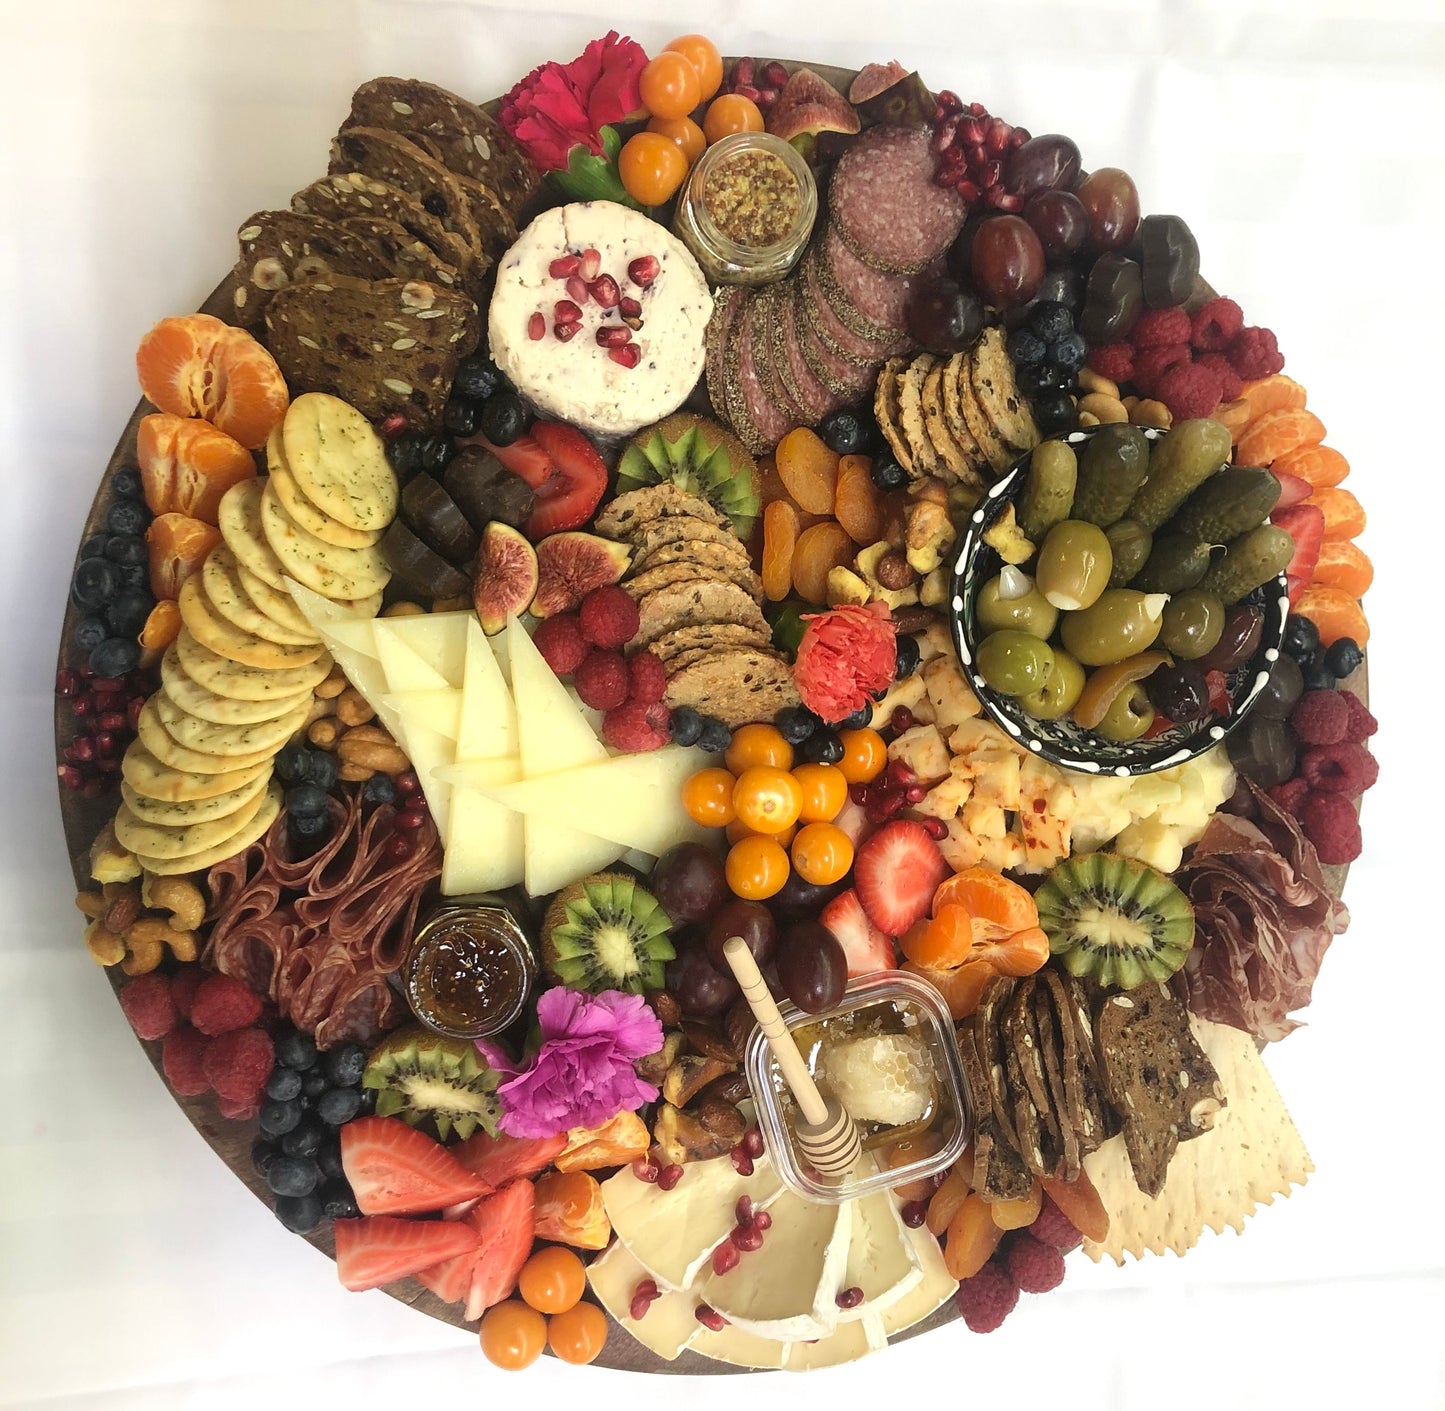 Seasonal Nibbles Charcuterie Board - Large Round Board (18 inches)